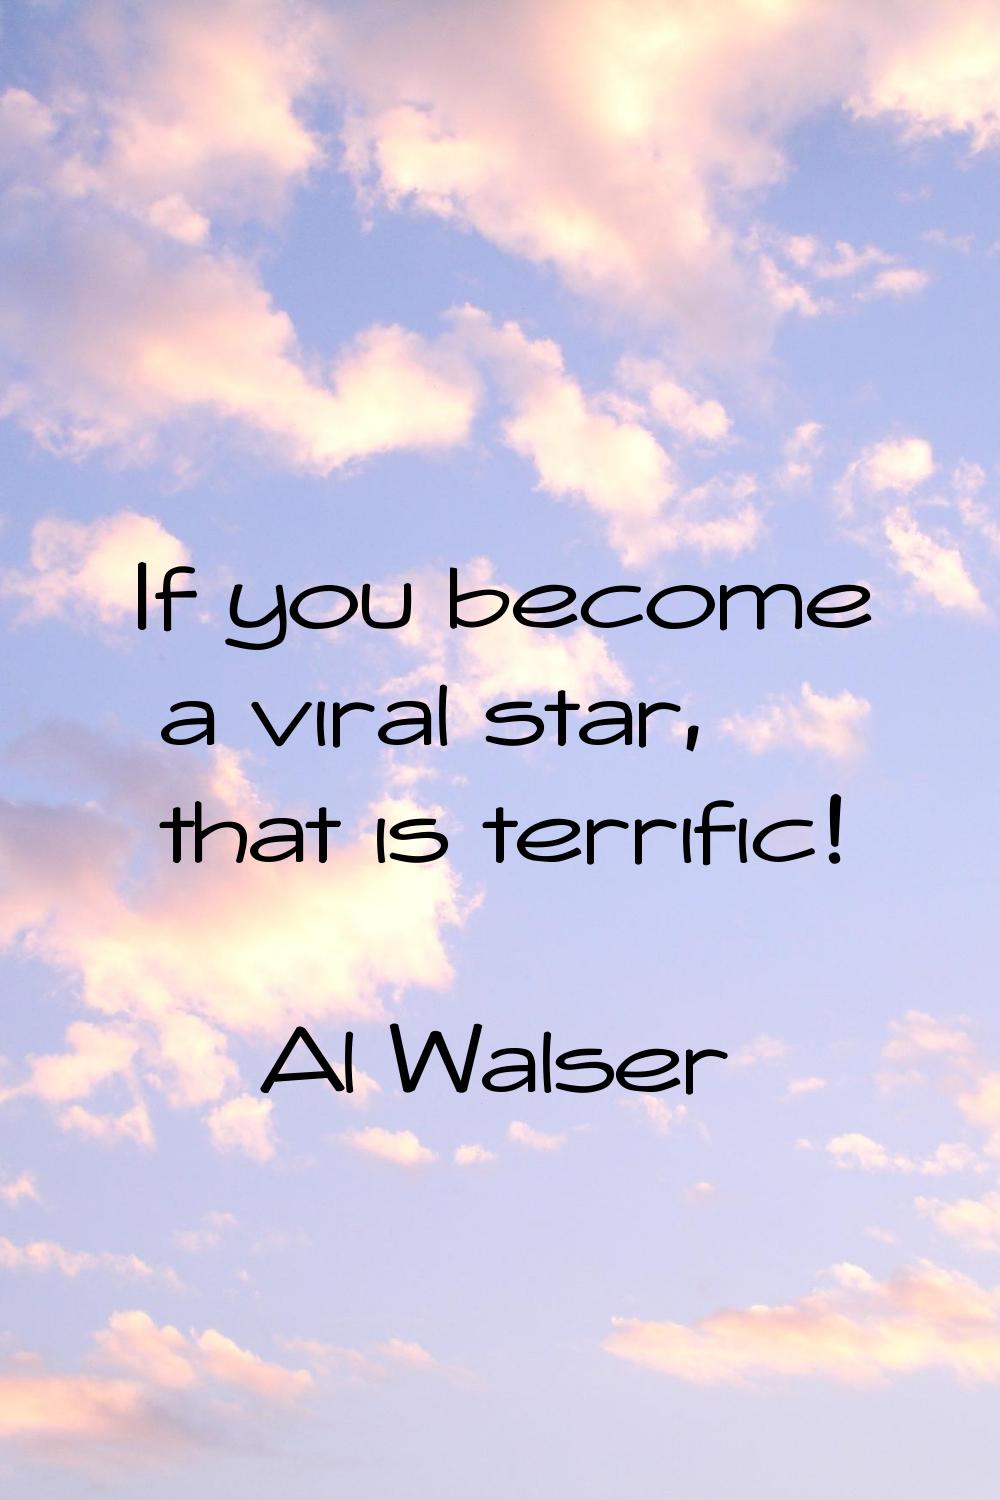 If you become a viral star, that is terrific!